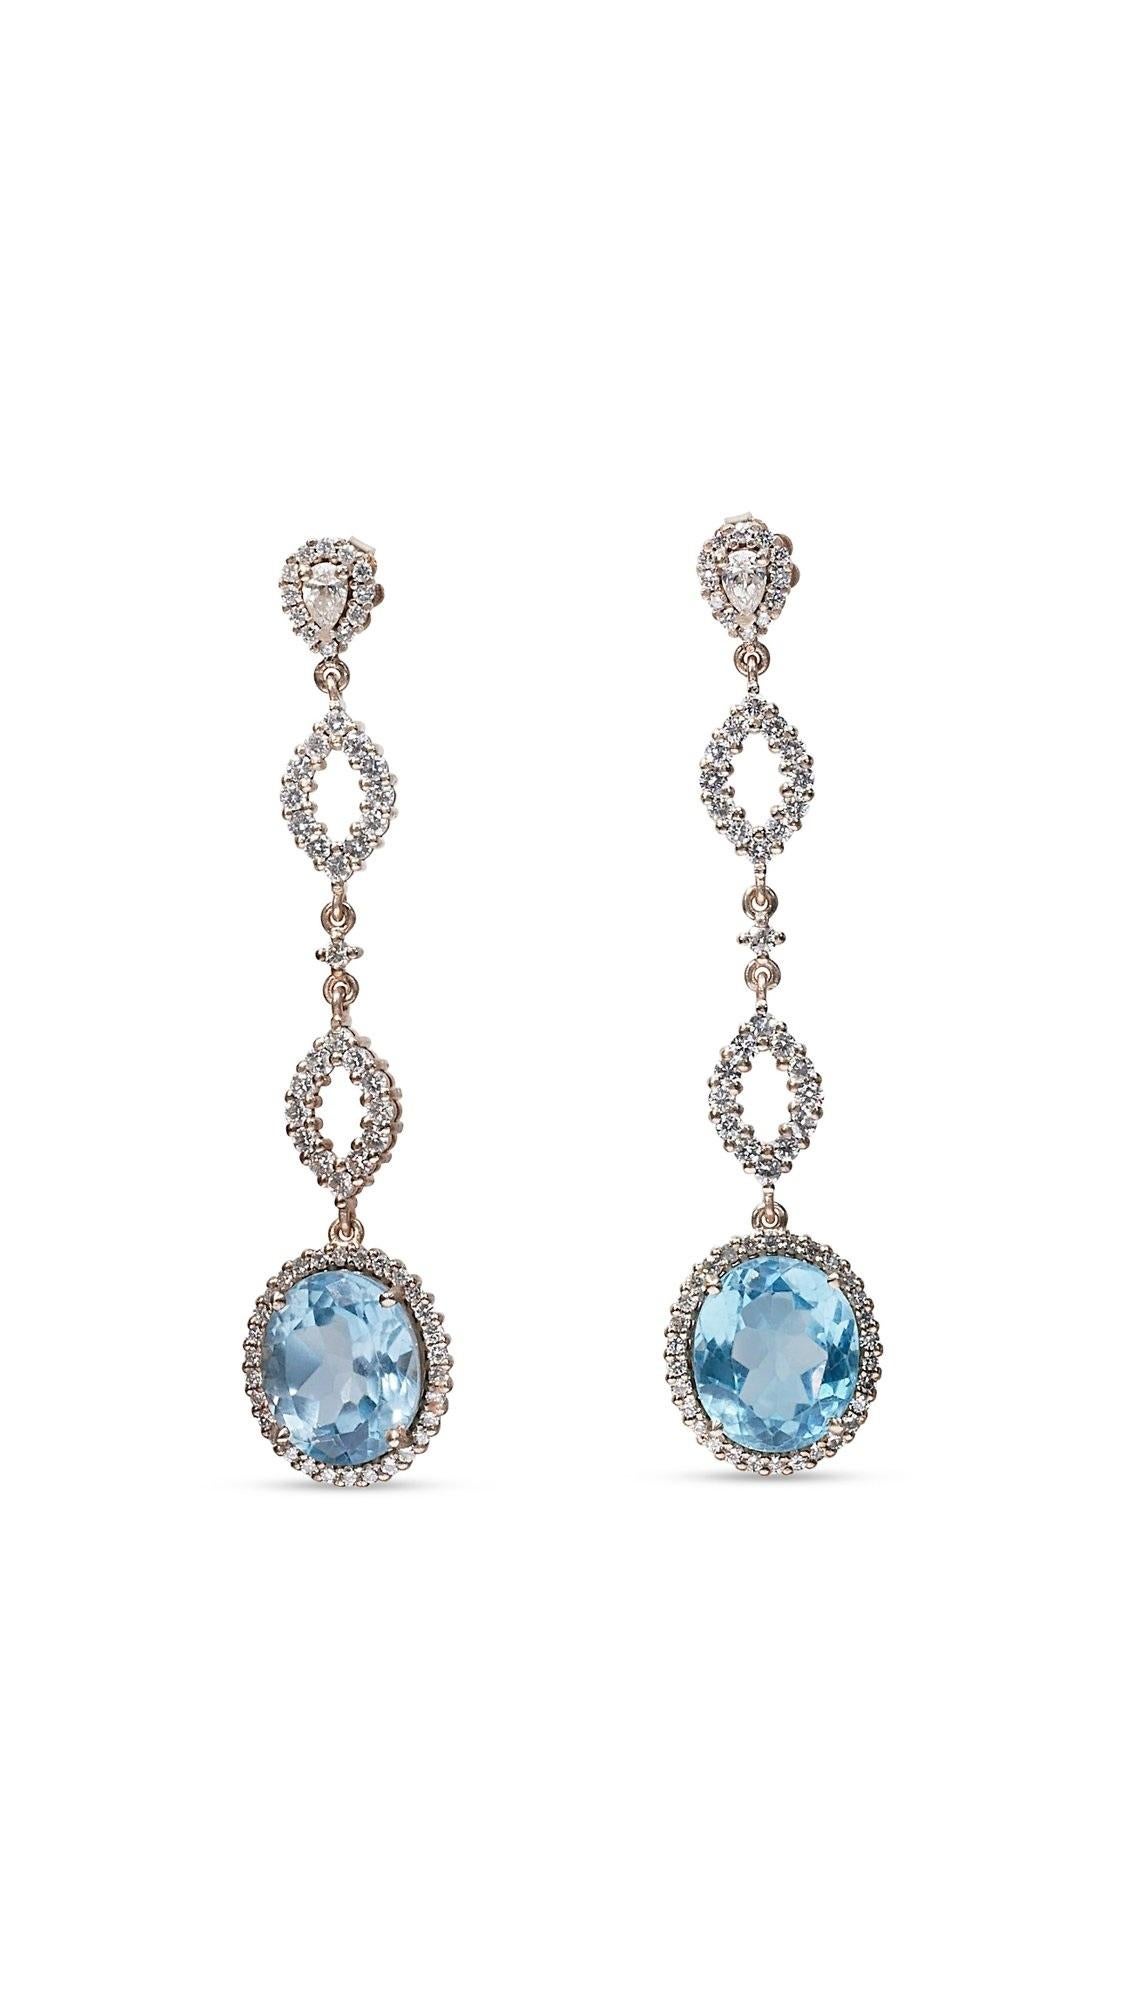 A beautiful pair of halo drop earrings with a dazzling pair of 14.80 carat oval natural blue topaz. It has 2.57 carat of side diamonds, which add more to their elegance. The jewelry is made of 18K white gold with a high quality polish. It comes with